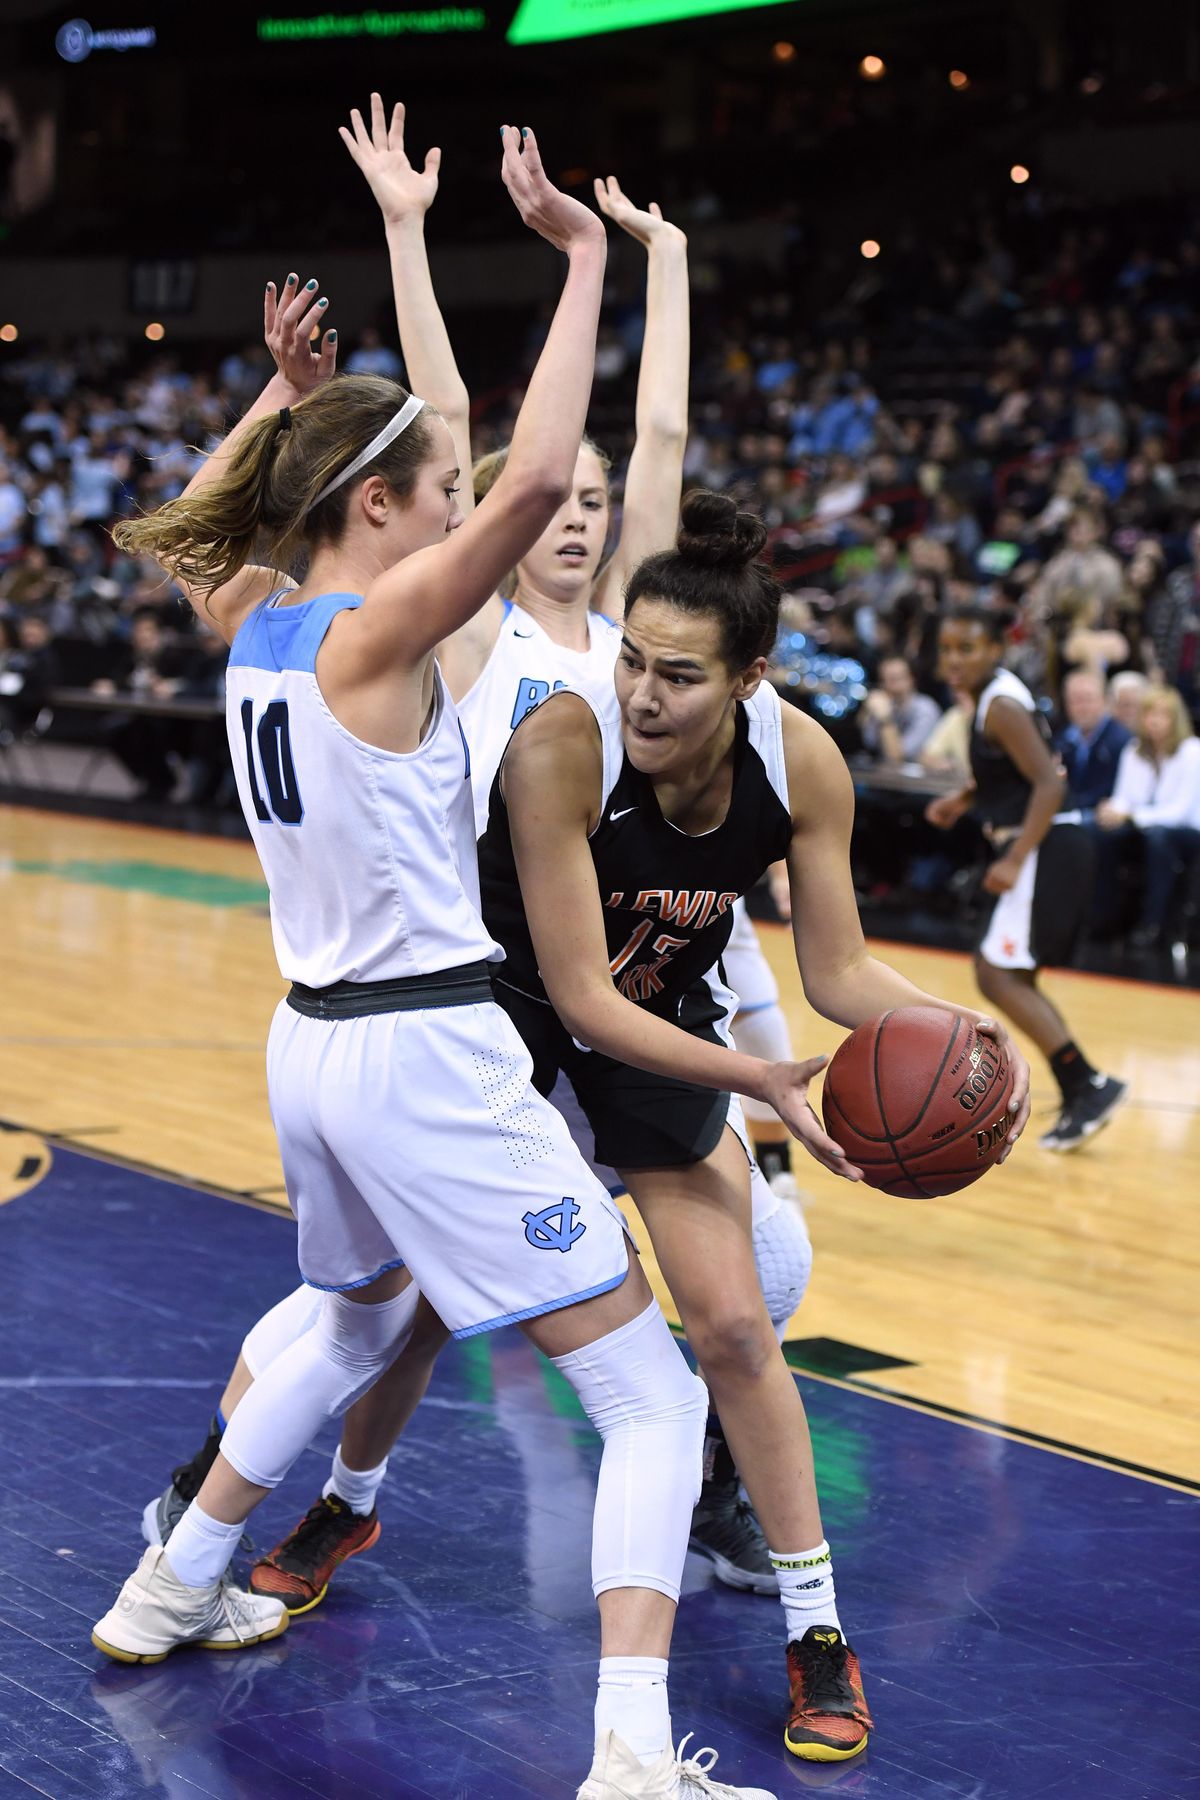 Lewis and Clark’s Jacinta Buckley  looks to pass as Central Valley’s Lexie Hull (10) and Hailey Christopher  defend during the District 8 4A title game on Feb. 16, 2018, in the  Arena. (Colin Mulvany / The Spokesman-Review)